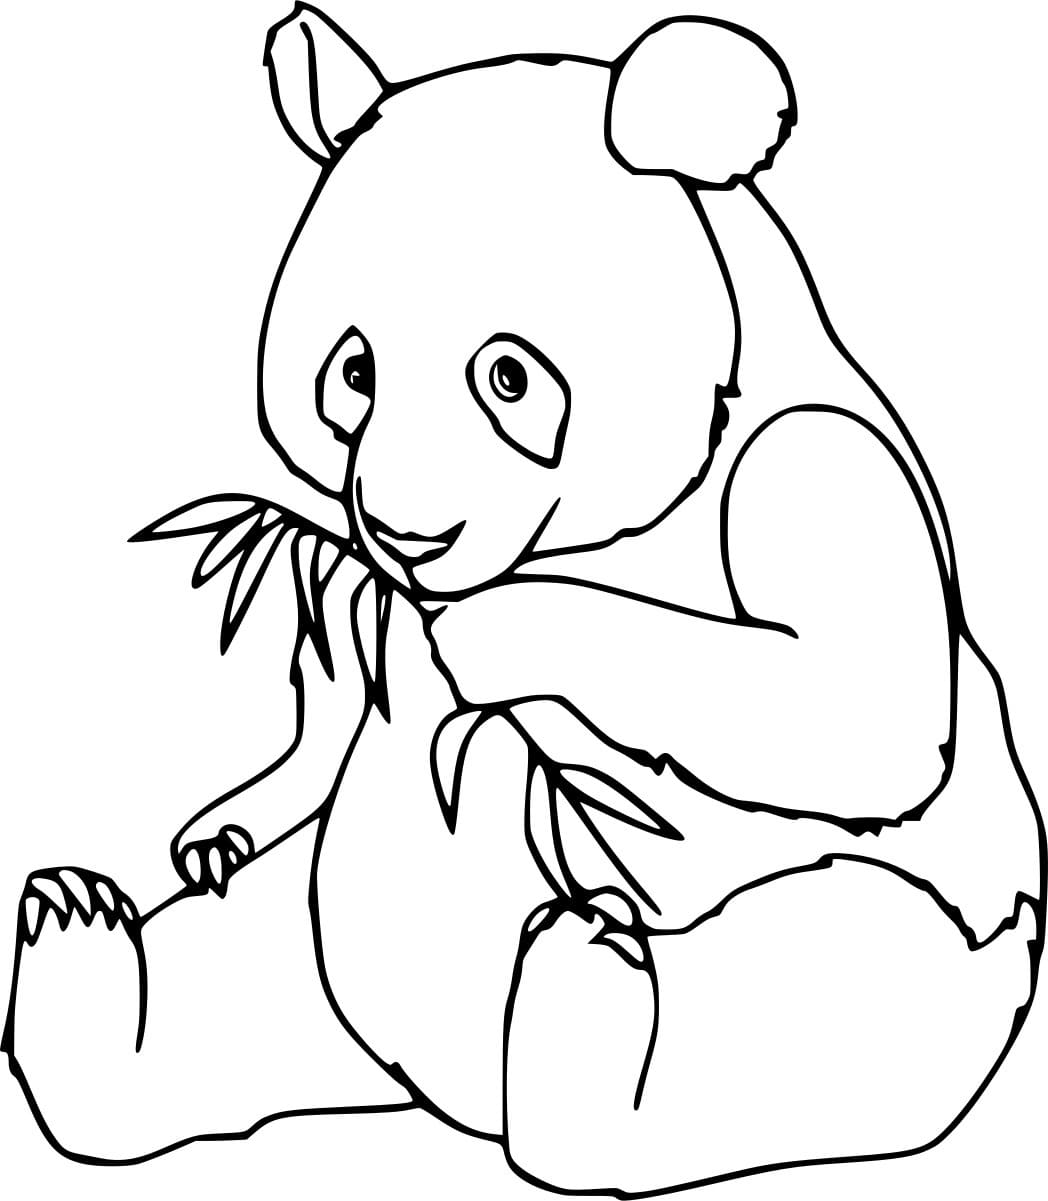 Panda Sits On The Ground Eating Bamboo Coloring Page